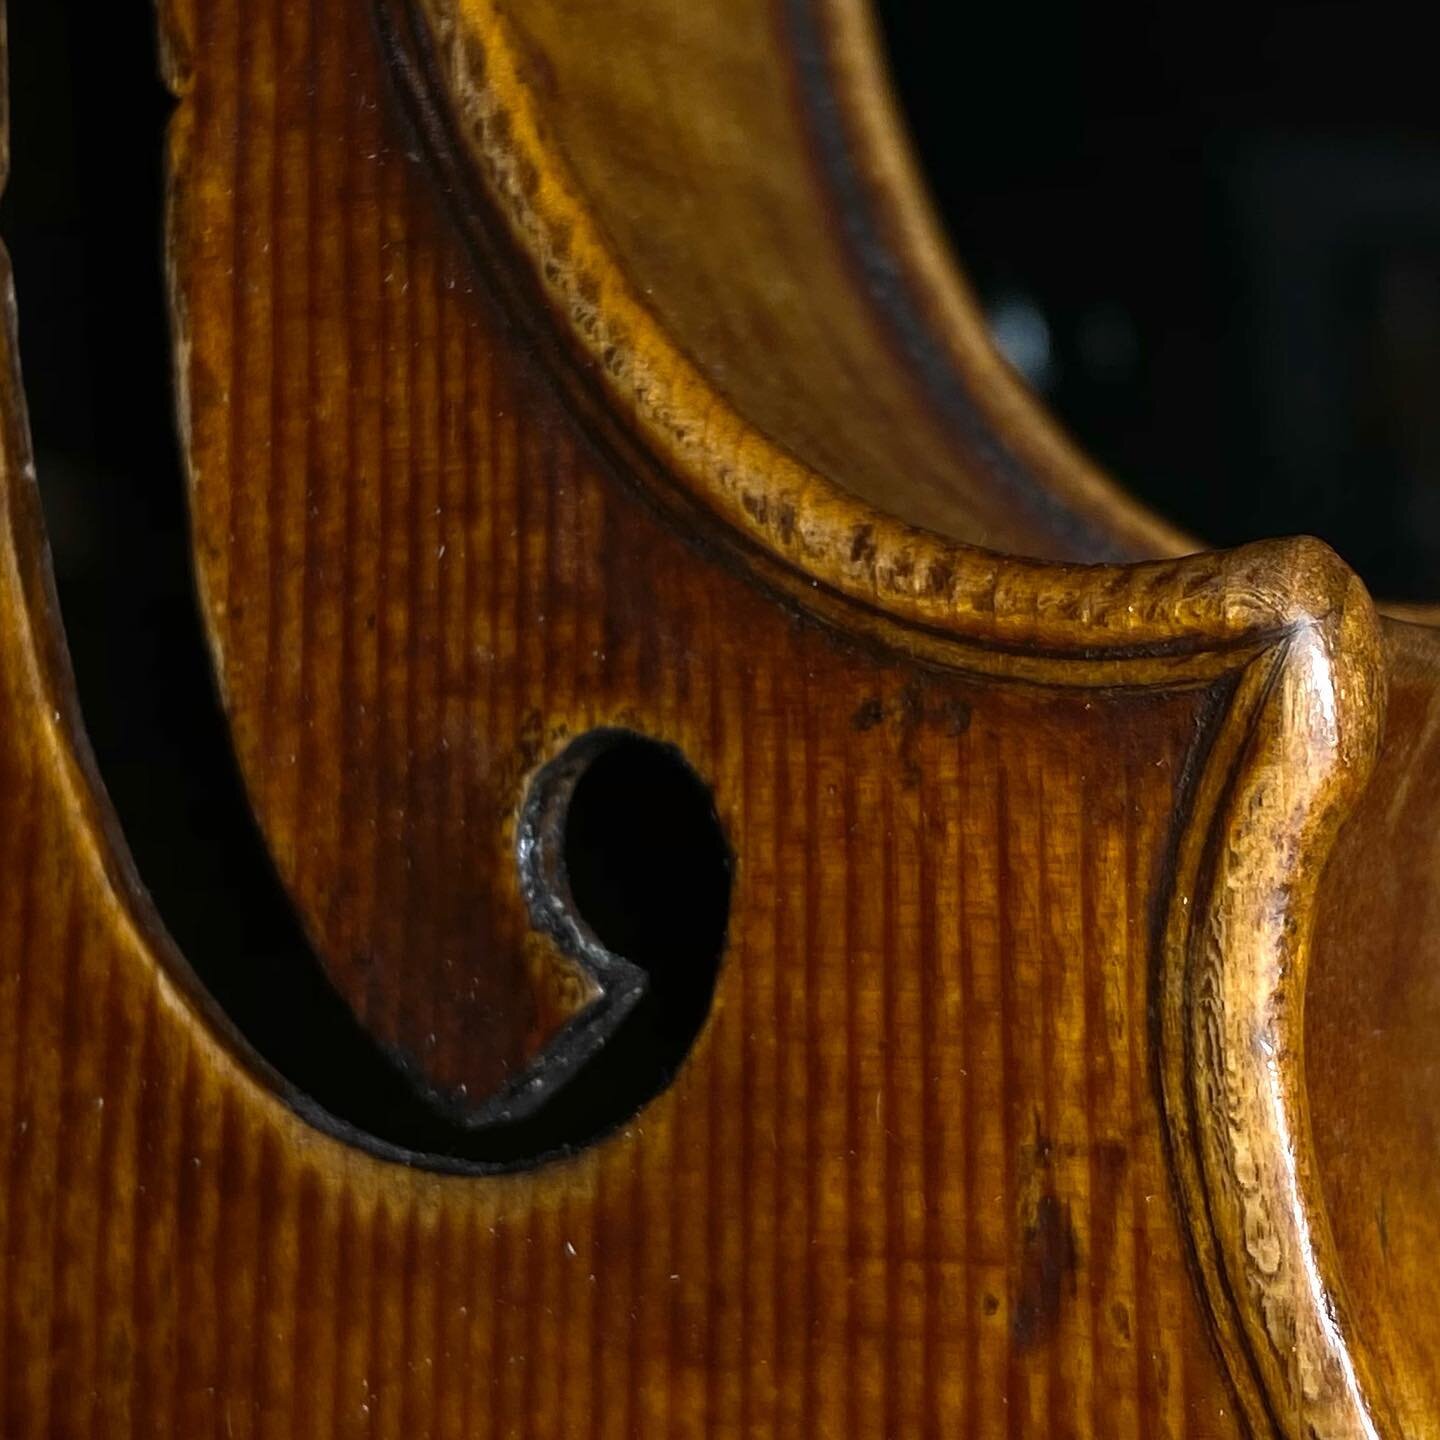 Whenever we look at C.G. Testore&rsquo;s instruments we lose ourselves in the peculiar aspects of its making.
With this instrument we tried our best to condense his craftsmanship in a violin with a unique personality, a deep sound and a care for each